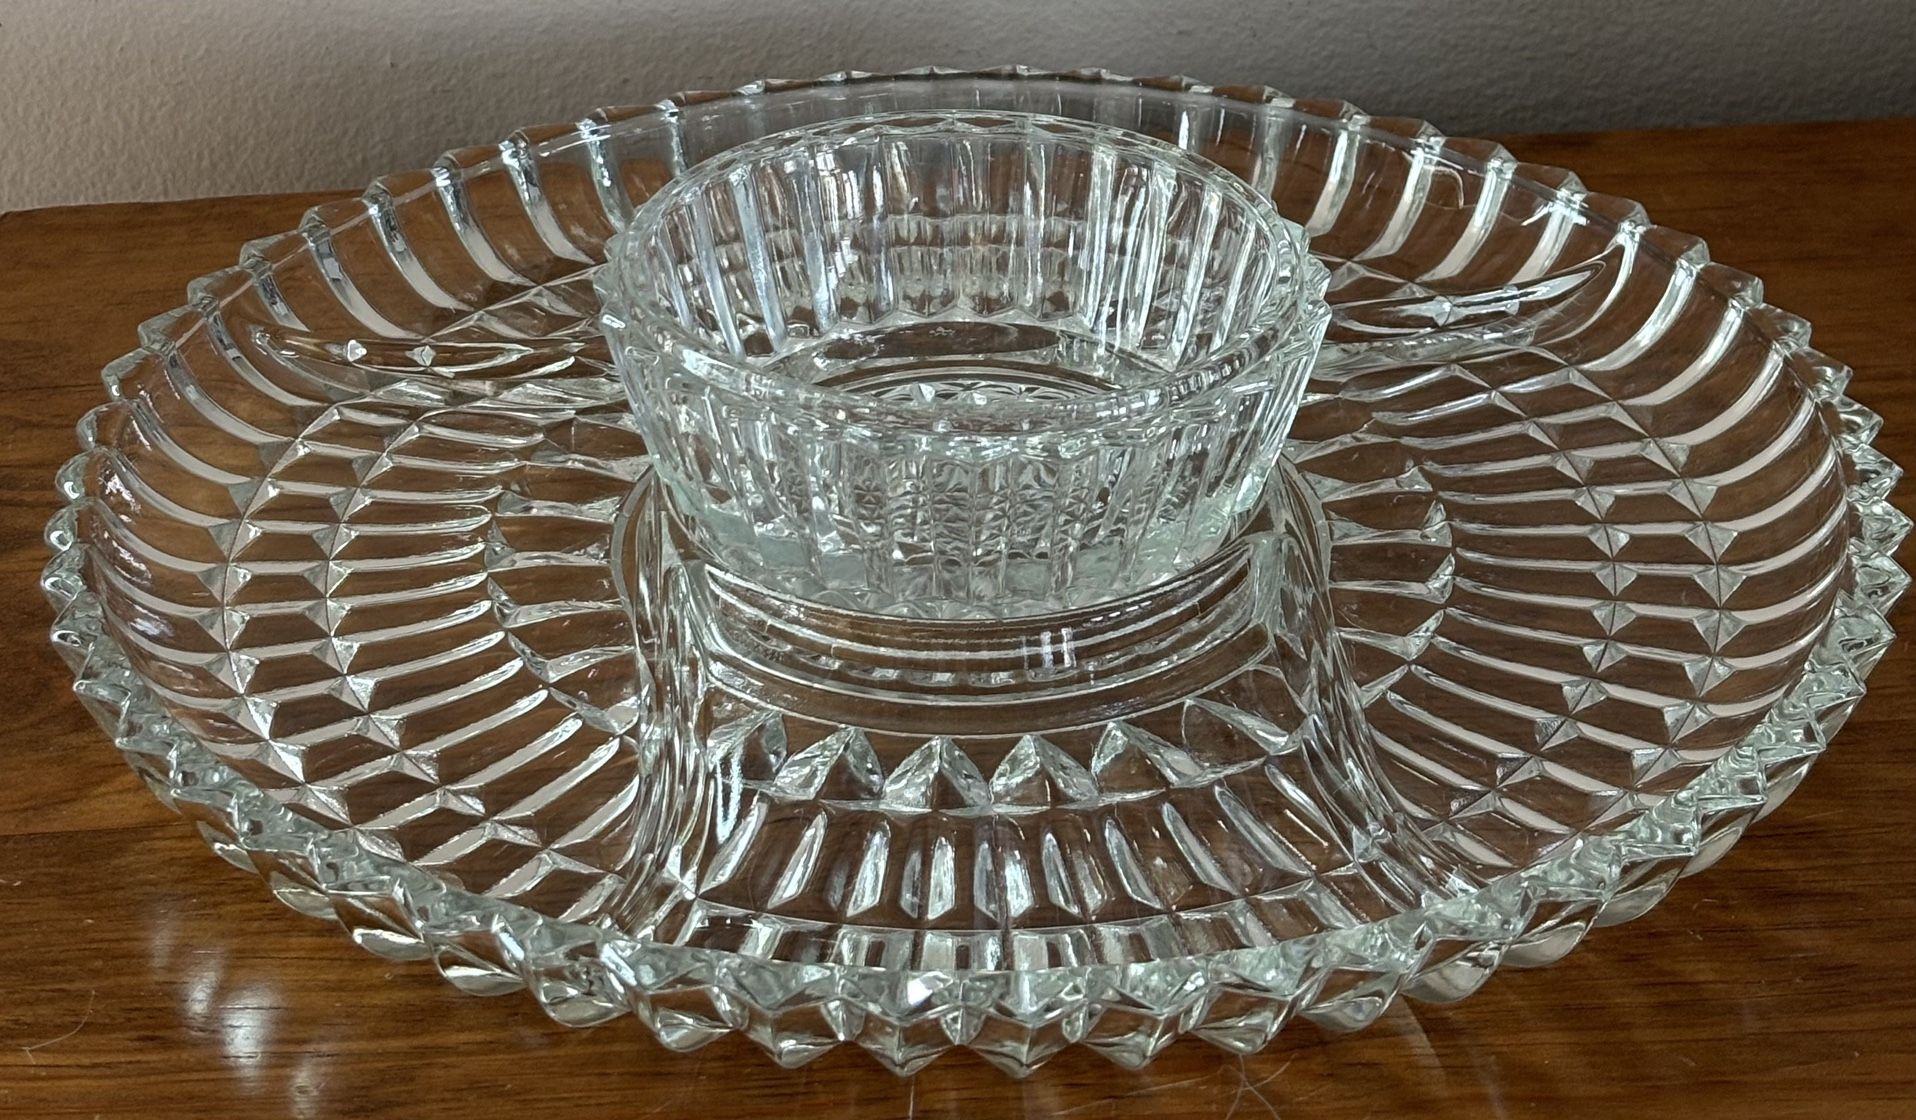 Vintage 1940s Jeanette Glass Company Relish Tray With Matching Glass Bowl🔹Full Description Below🔹